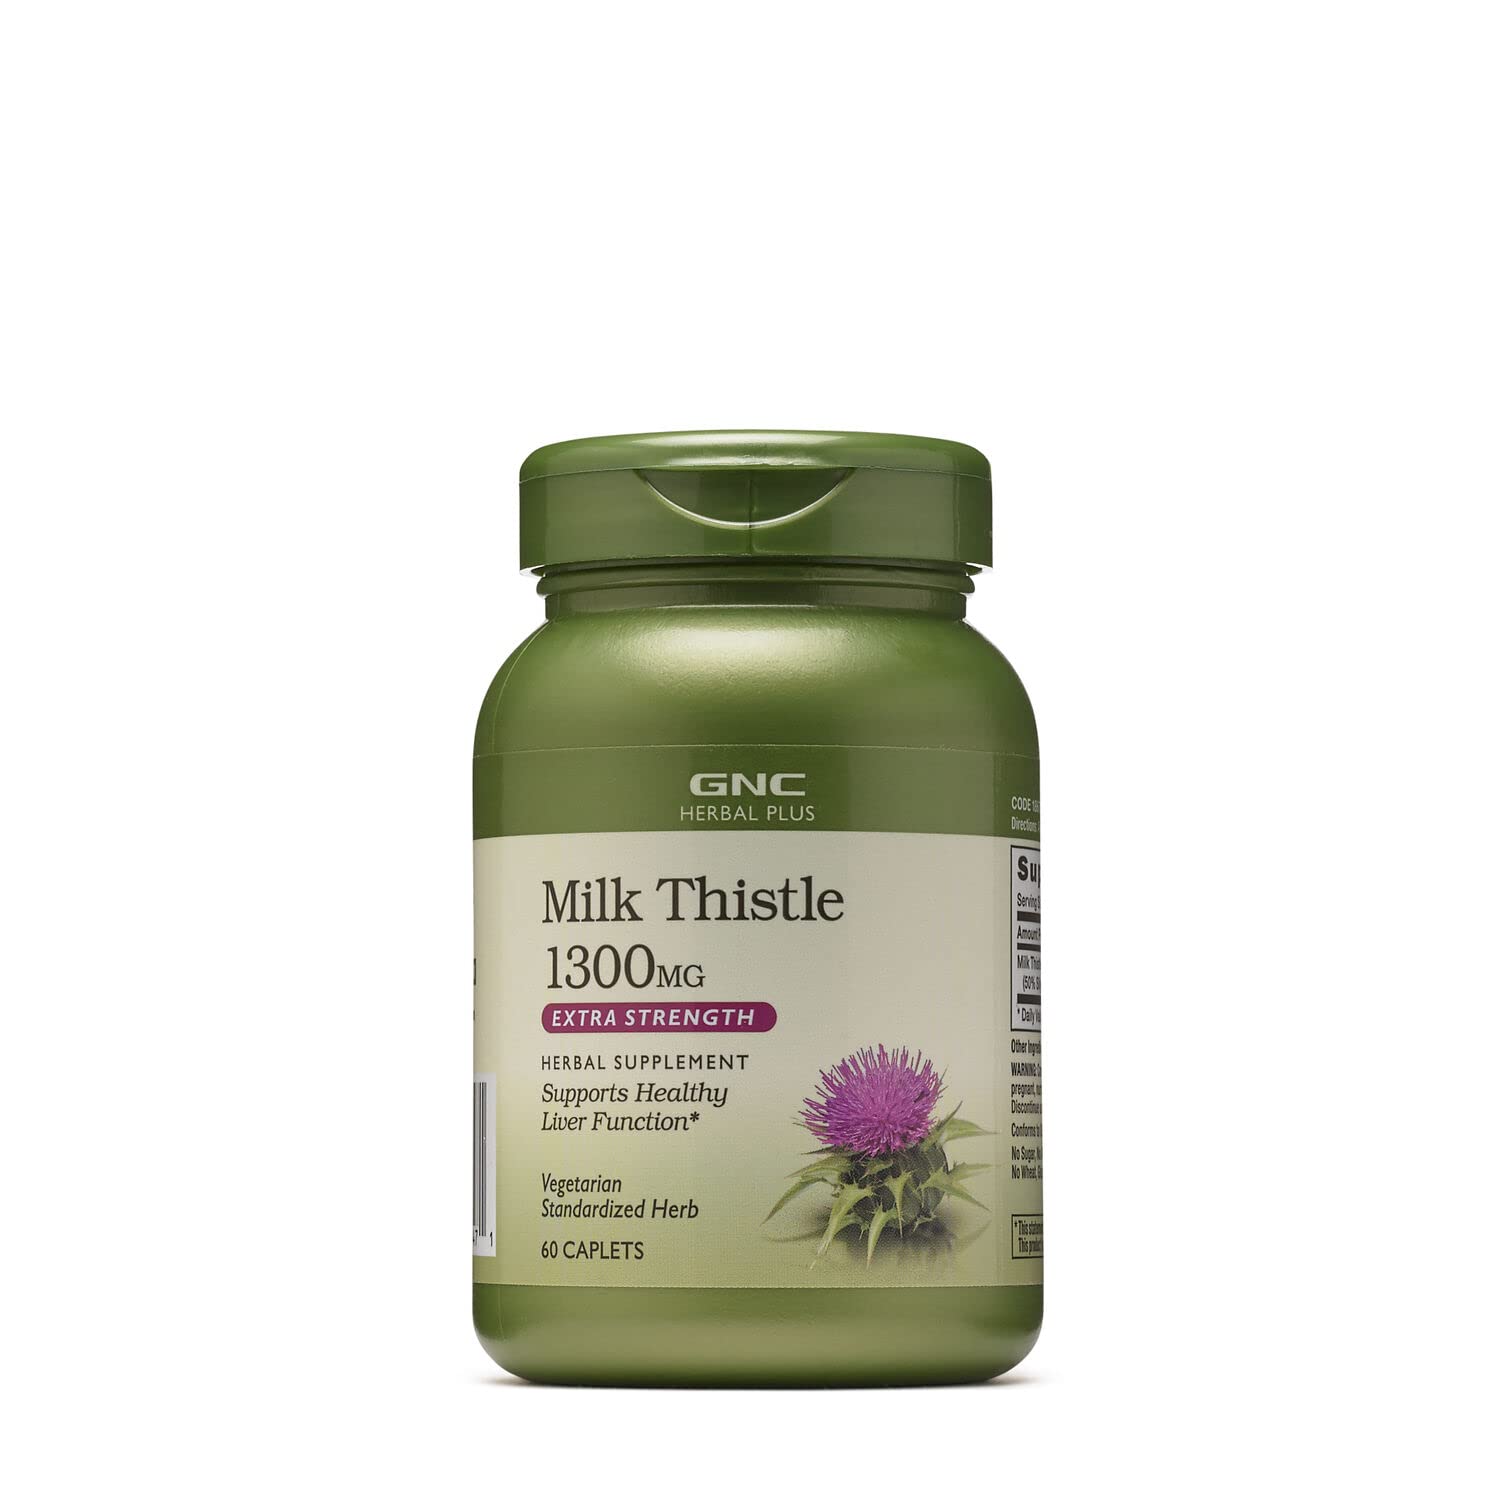 GNC Herbal Plus Milk Thistle 1300mg | Supports Liver Health | 60 Caplets